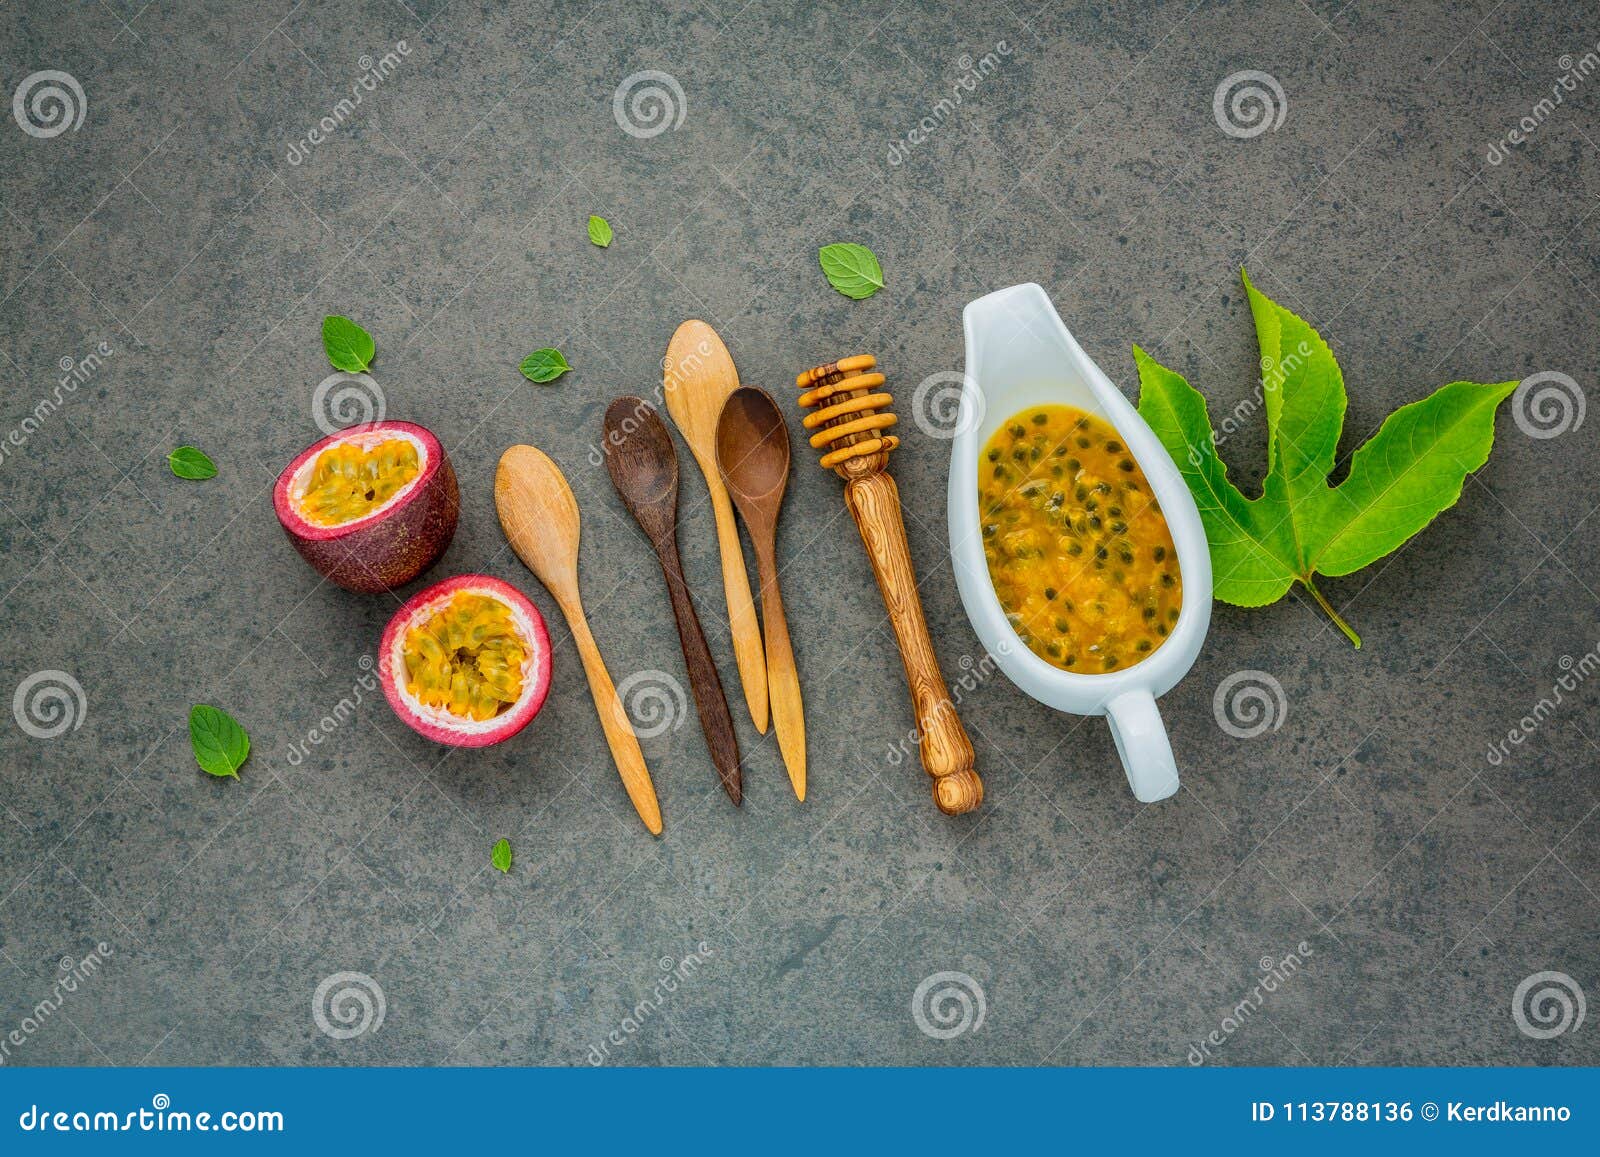 Fresh passion fruits set up on dark stone background. Passion fruits and juice with pepper mint leaves. Healthy food backgroud concept.